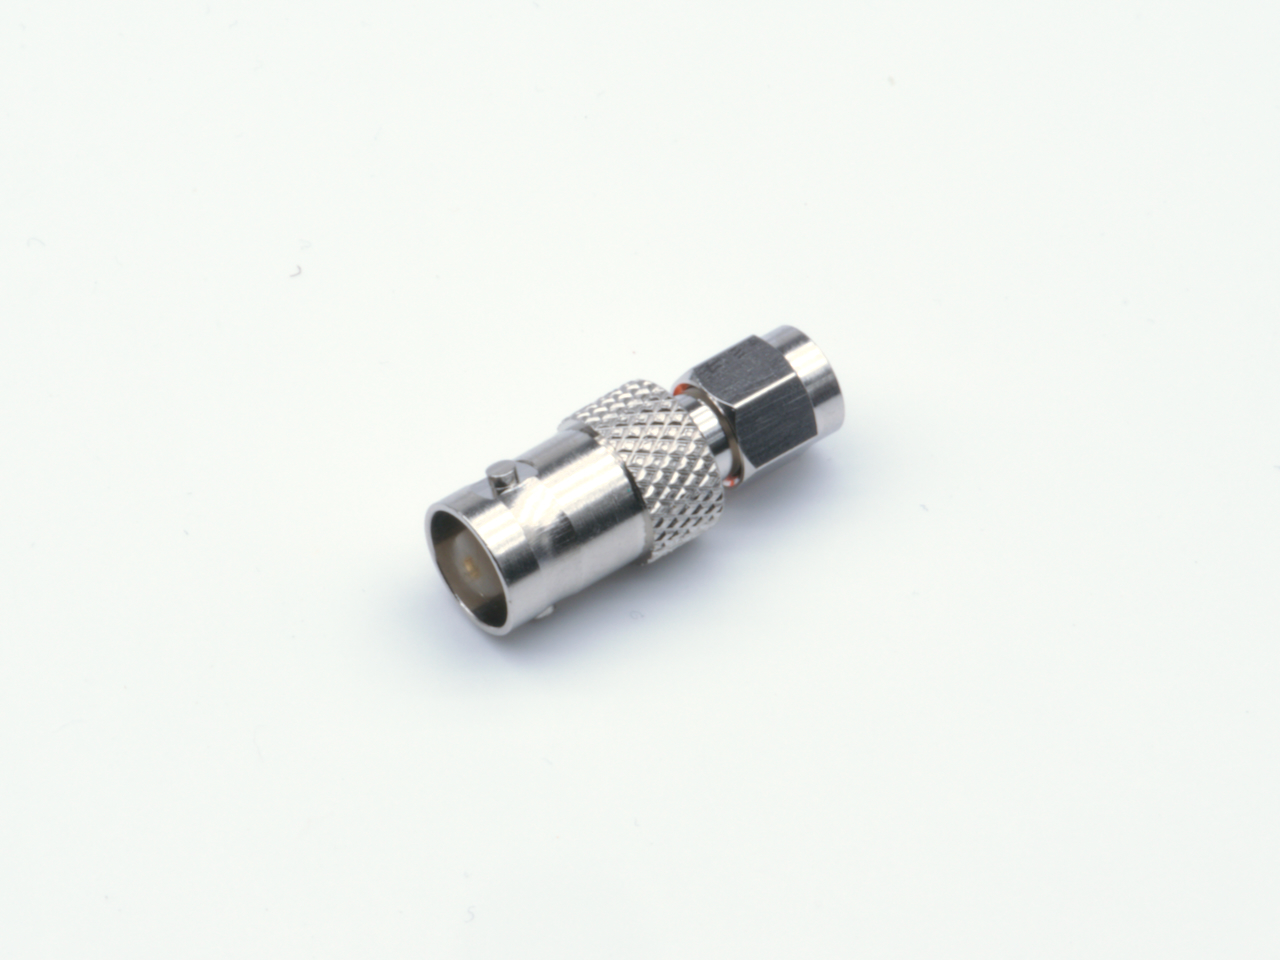 Male SMA to Female BNC adapter